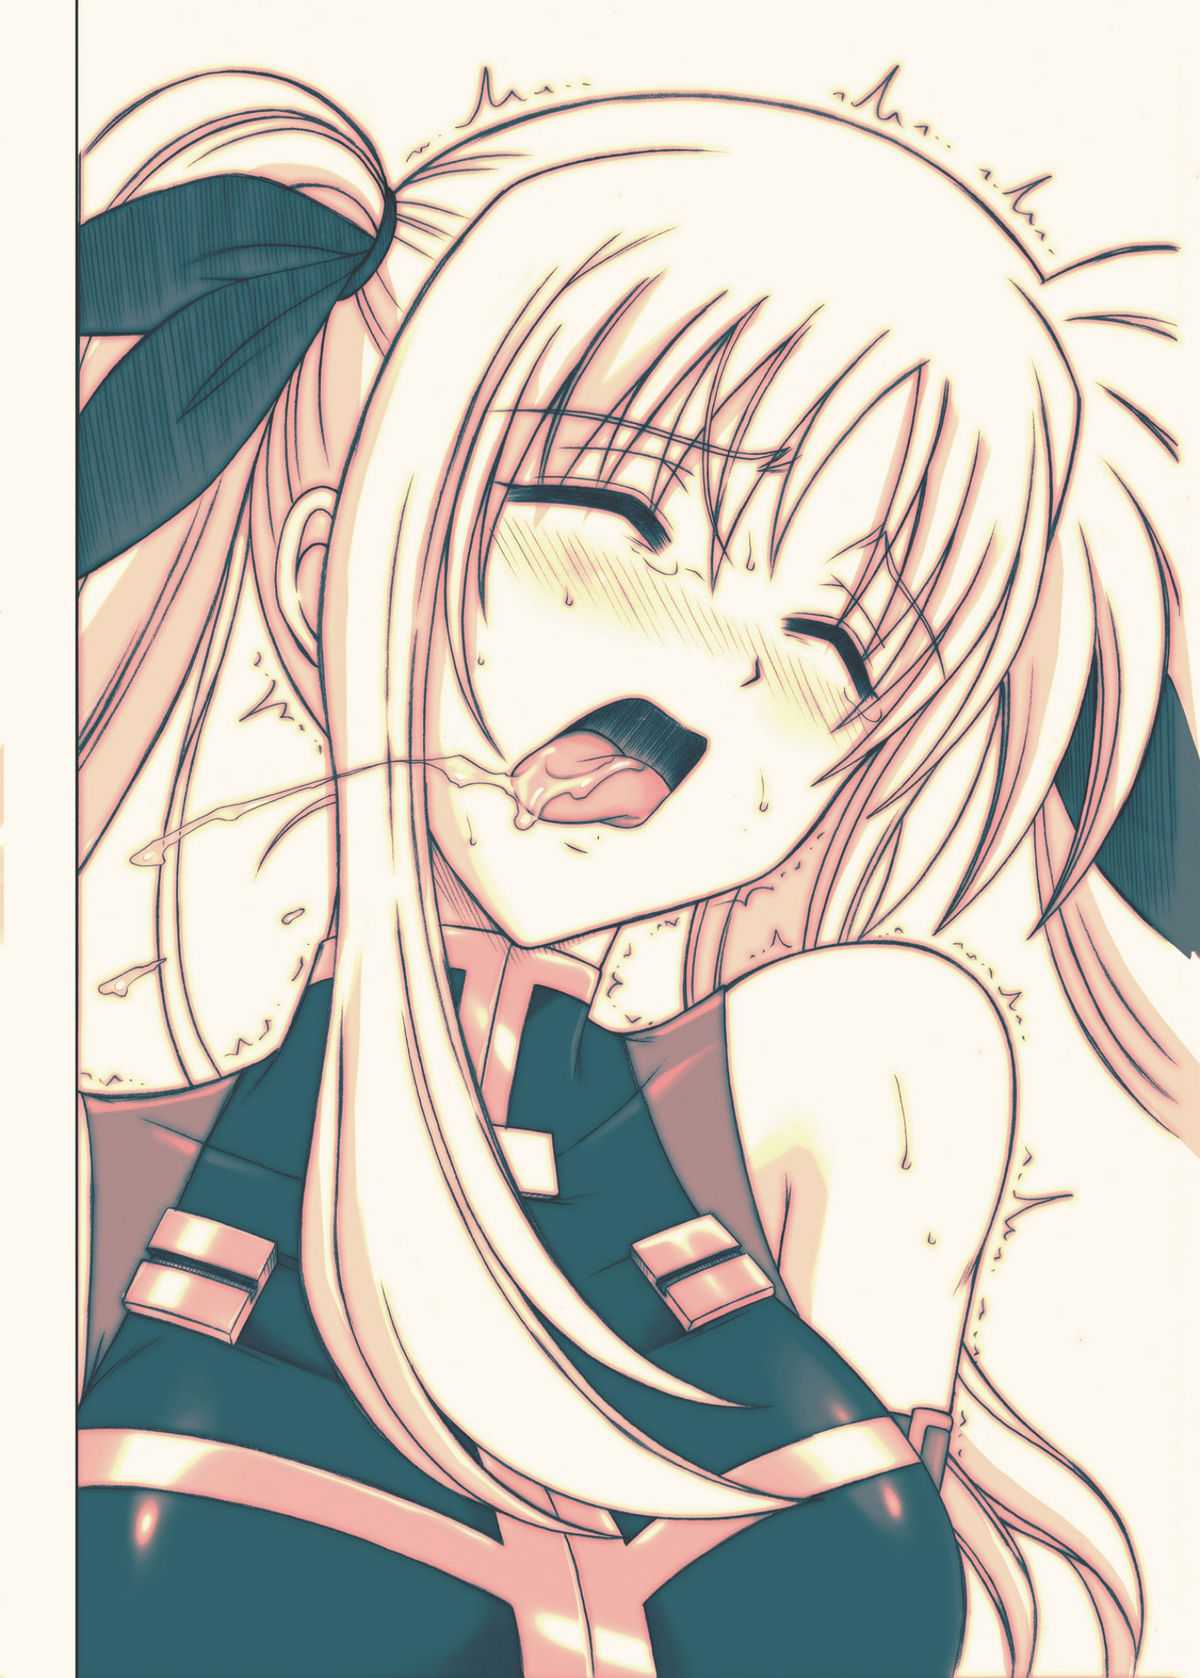 (C74) [CYCLONE (Izumi Kazuya)] 840 BAD END -Color Classic Situation Note Extention 1.5- (Mahou Shoujo Lyrical Nanoha) [Digital] [Colored] [Portuguese-BR] (C74) [サイクロン (和泉和也)] 840 BAD END -Color Classic Situation Note Extention 1.5- (魔法少女リリカルなのは) [デジタル版] [カラー]